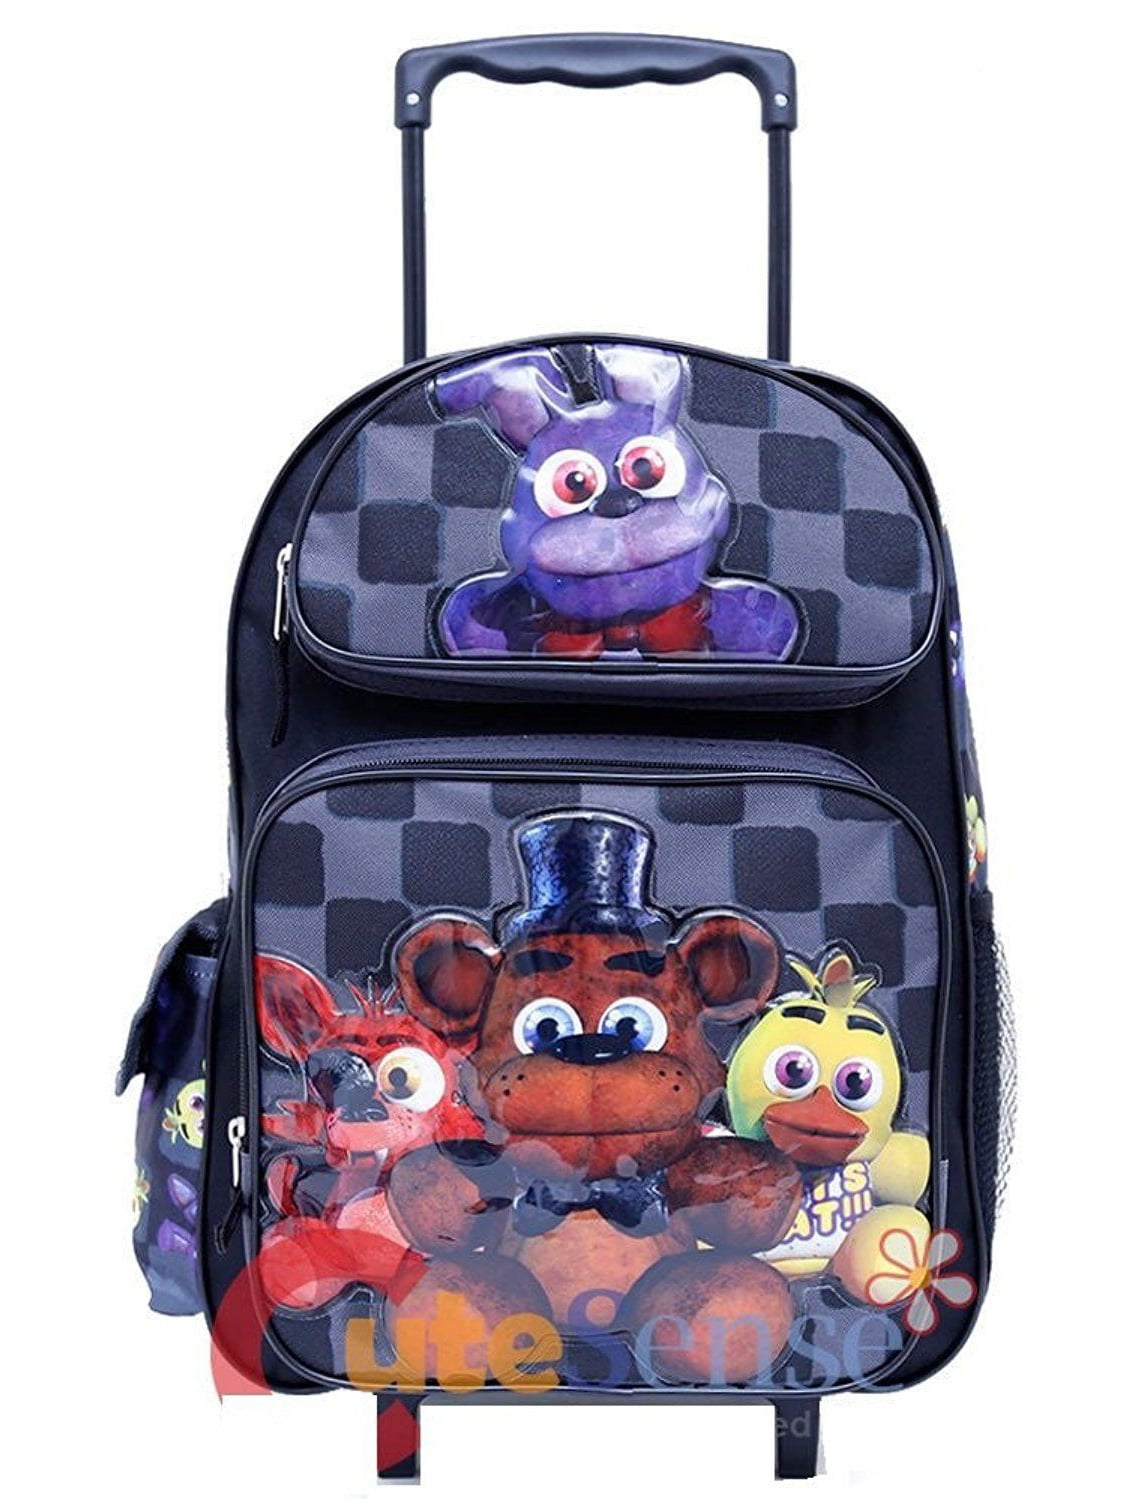 Five Nights at Freddy's 17.5 Large School Backpack